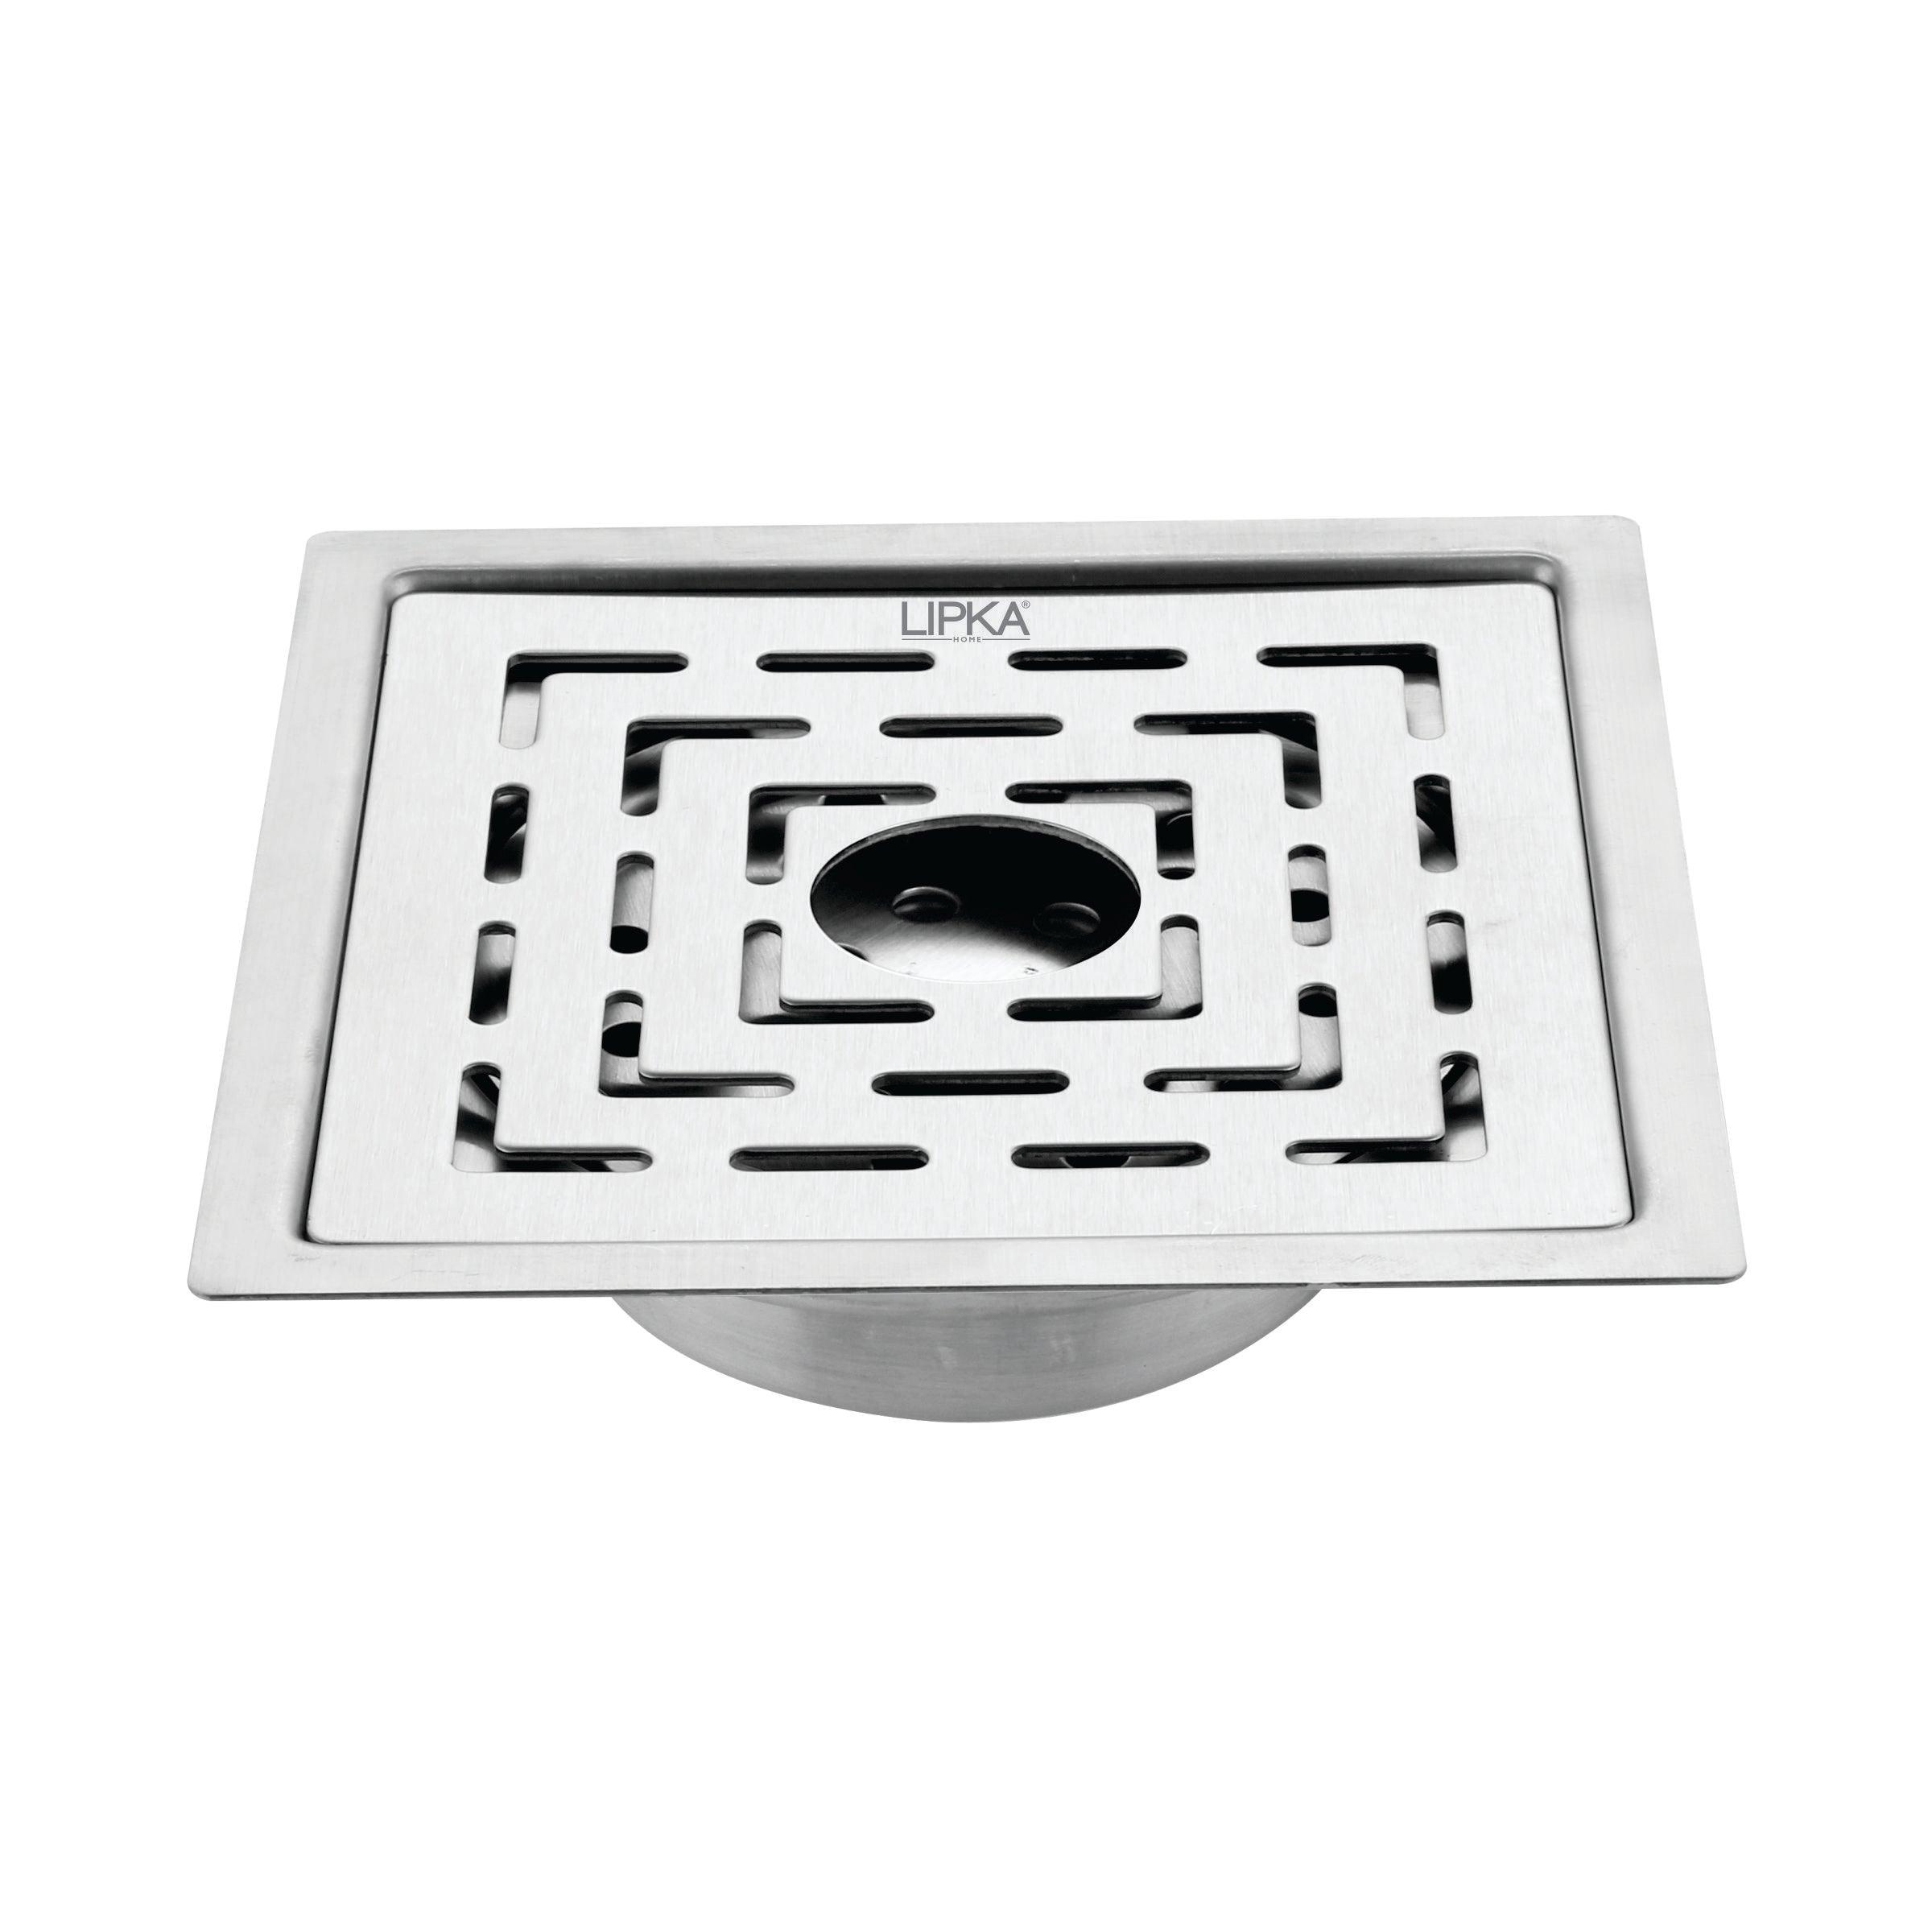 Orange Exclusive Square Flat Cut Floor Drain (5 Inches) with Cockroach Trap And Hole